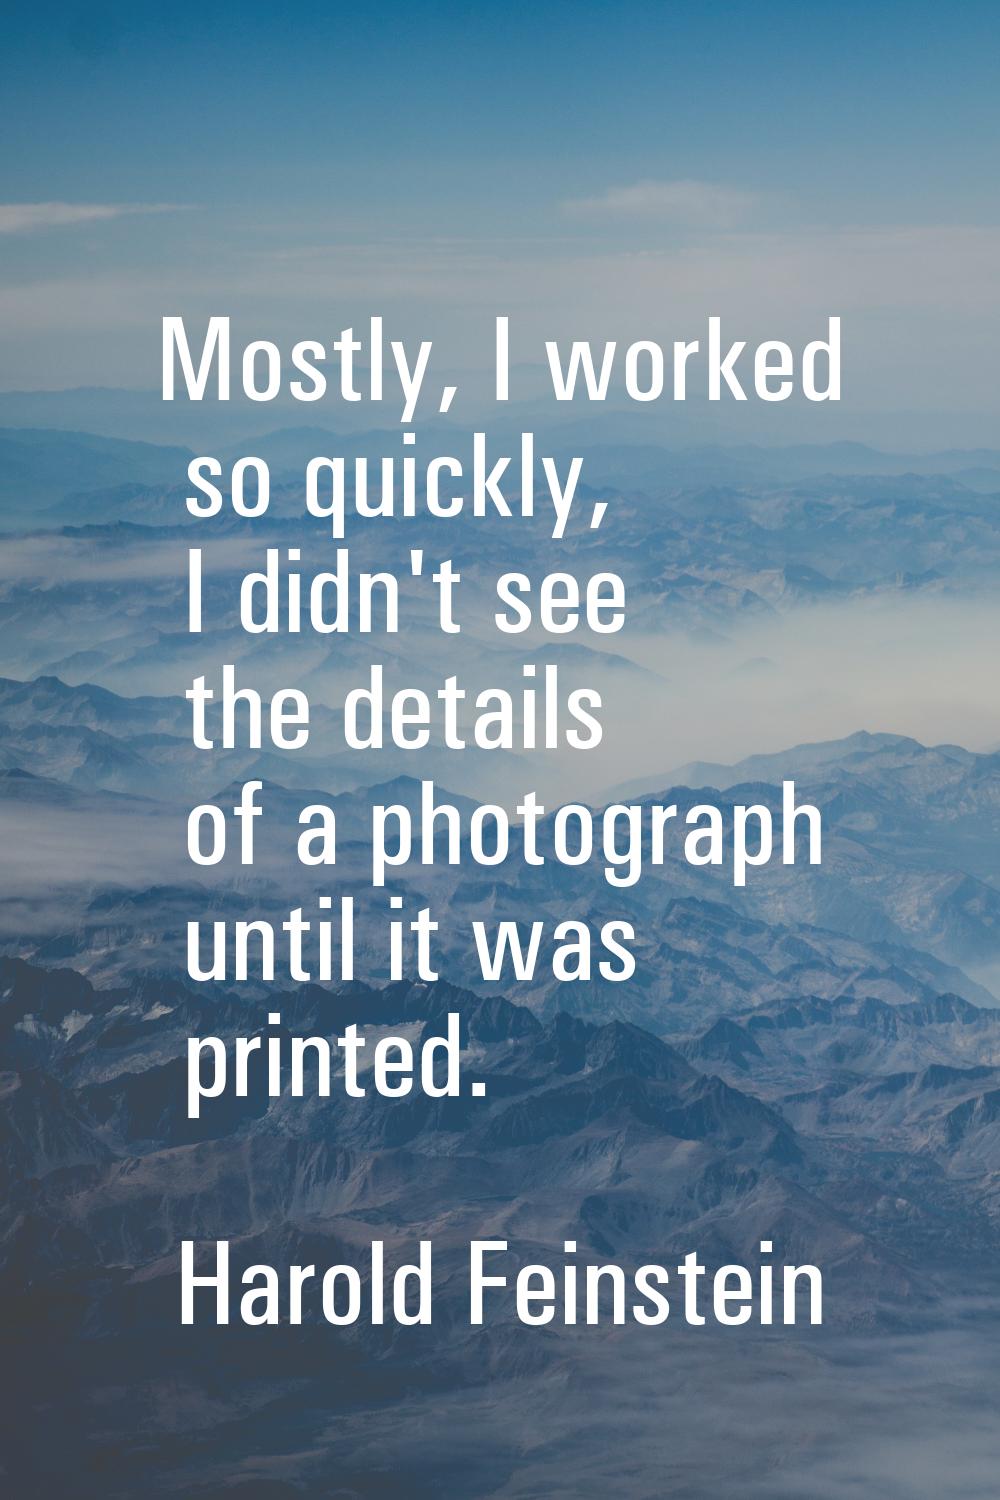 Mostly, I worked so quickly, I didn't see the details of a photograph until it was printed.